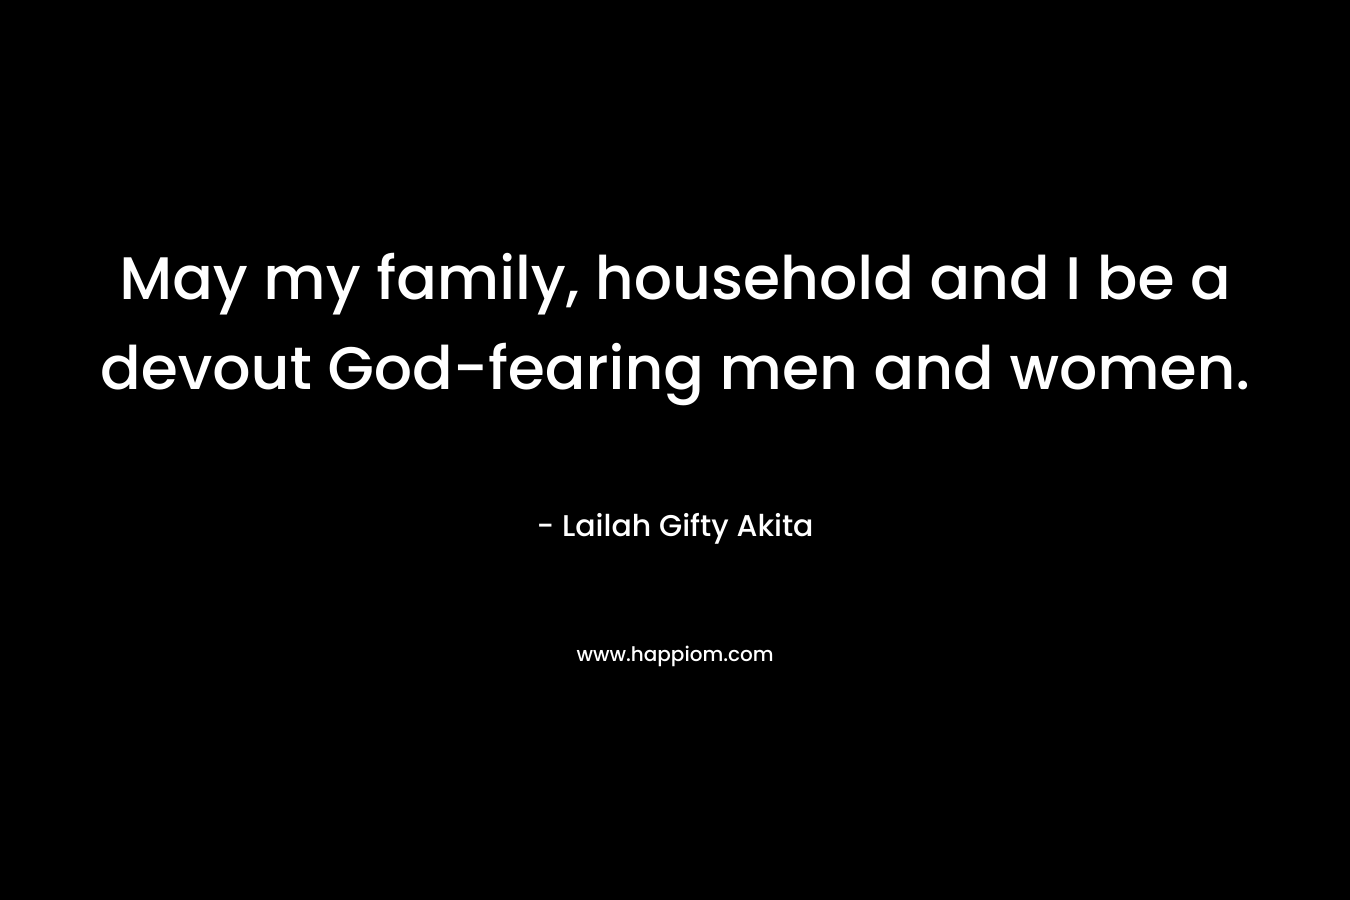 May my family, household and I be a devout God-fearing men and women.